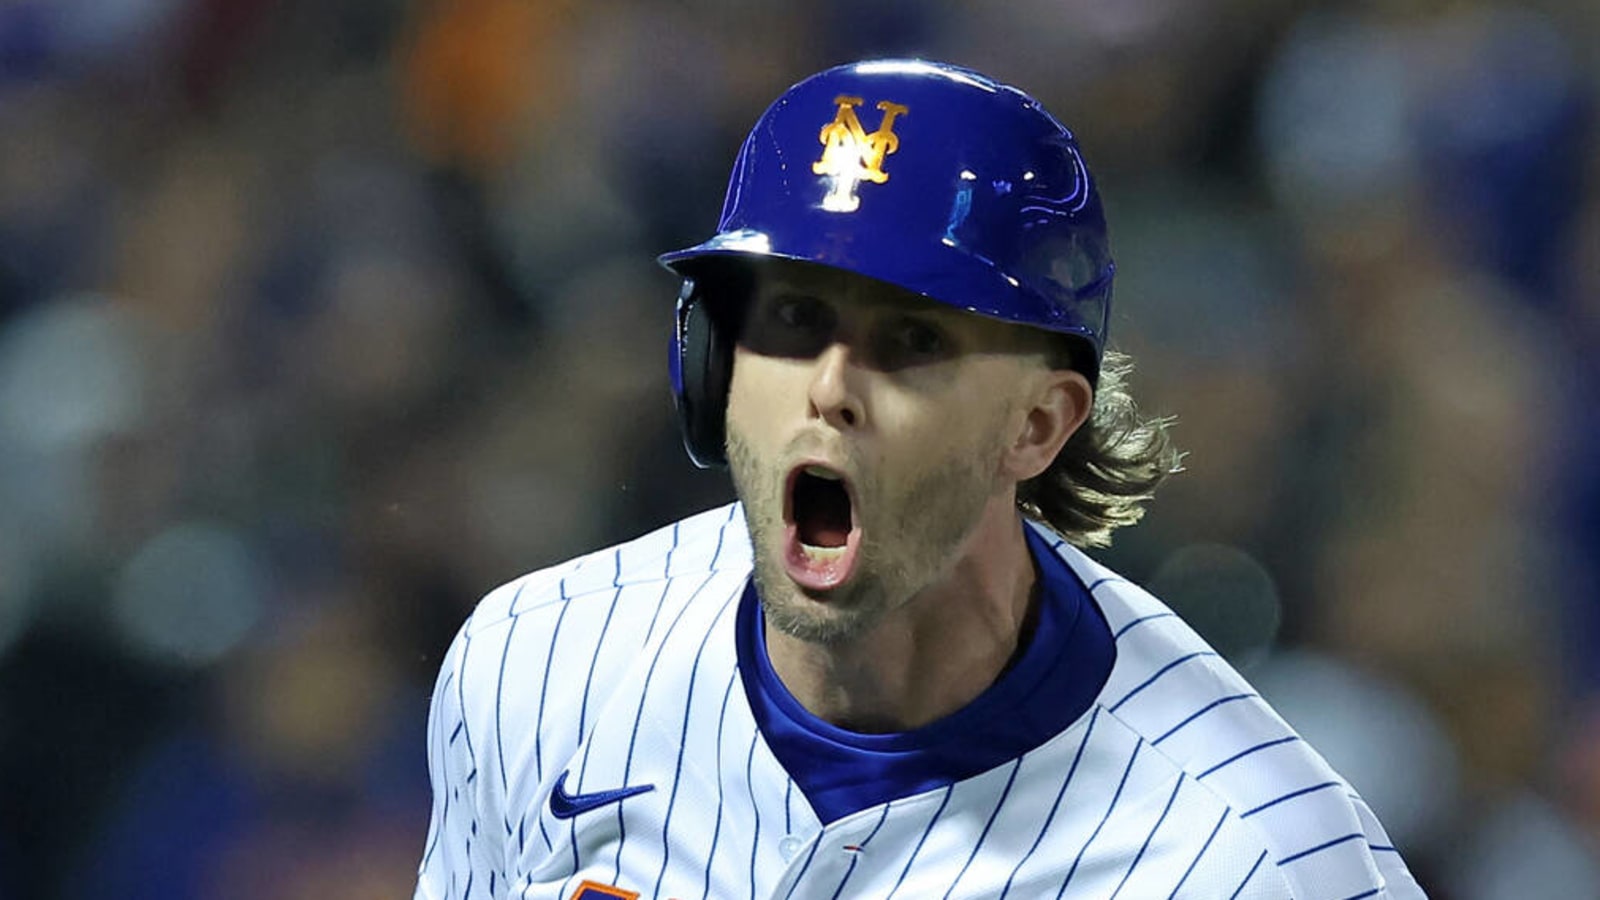 Big seventh inning helps Mets even Wild Card series with Padres